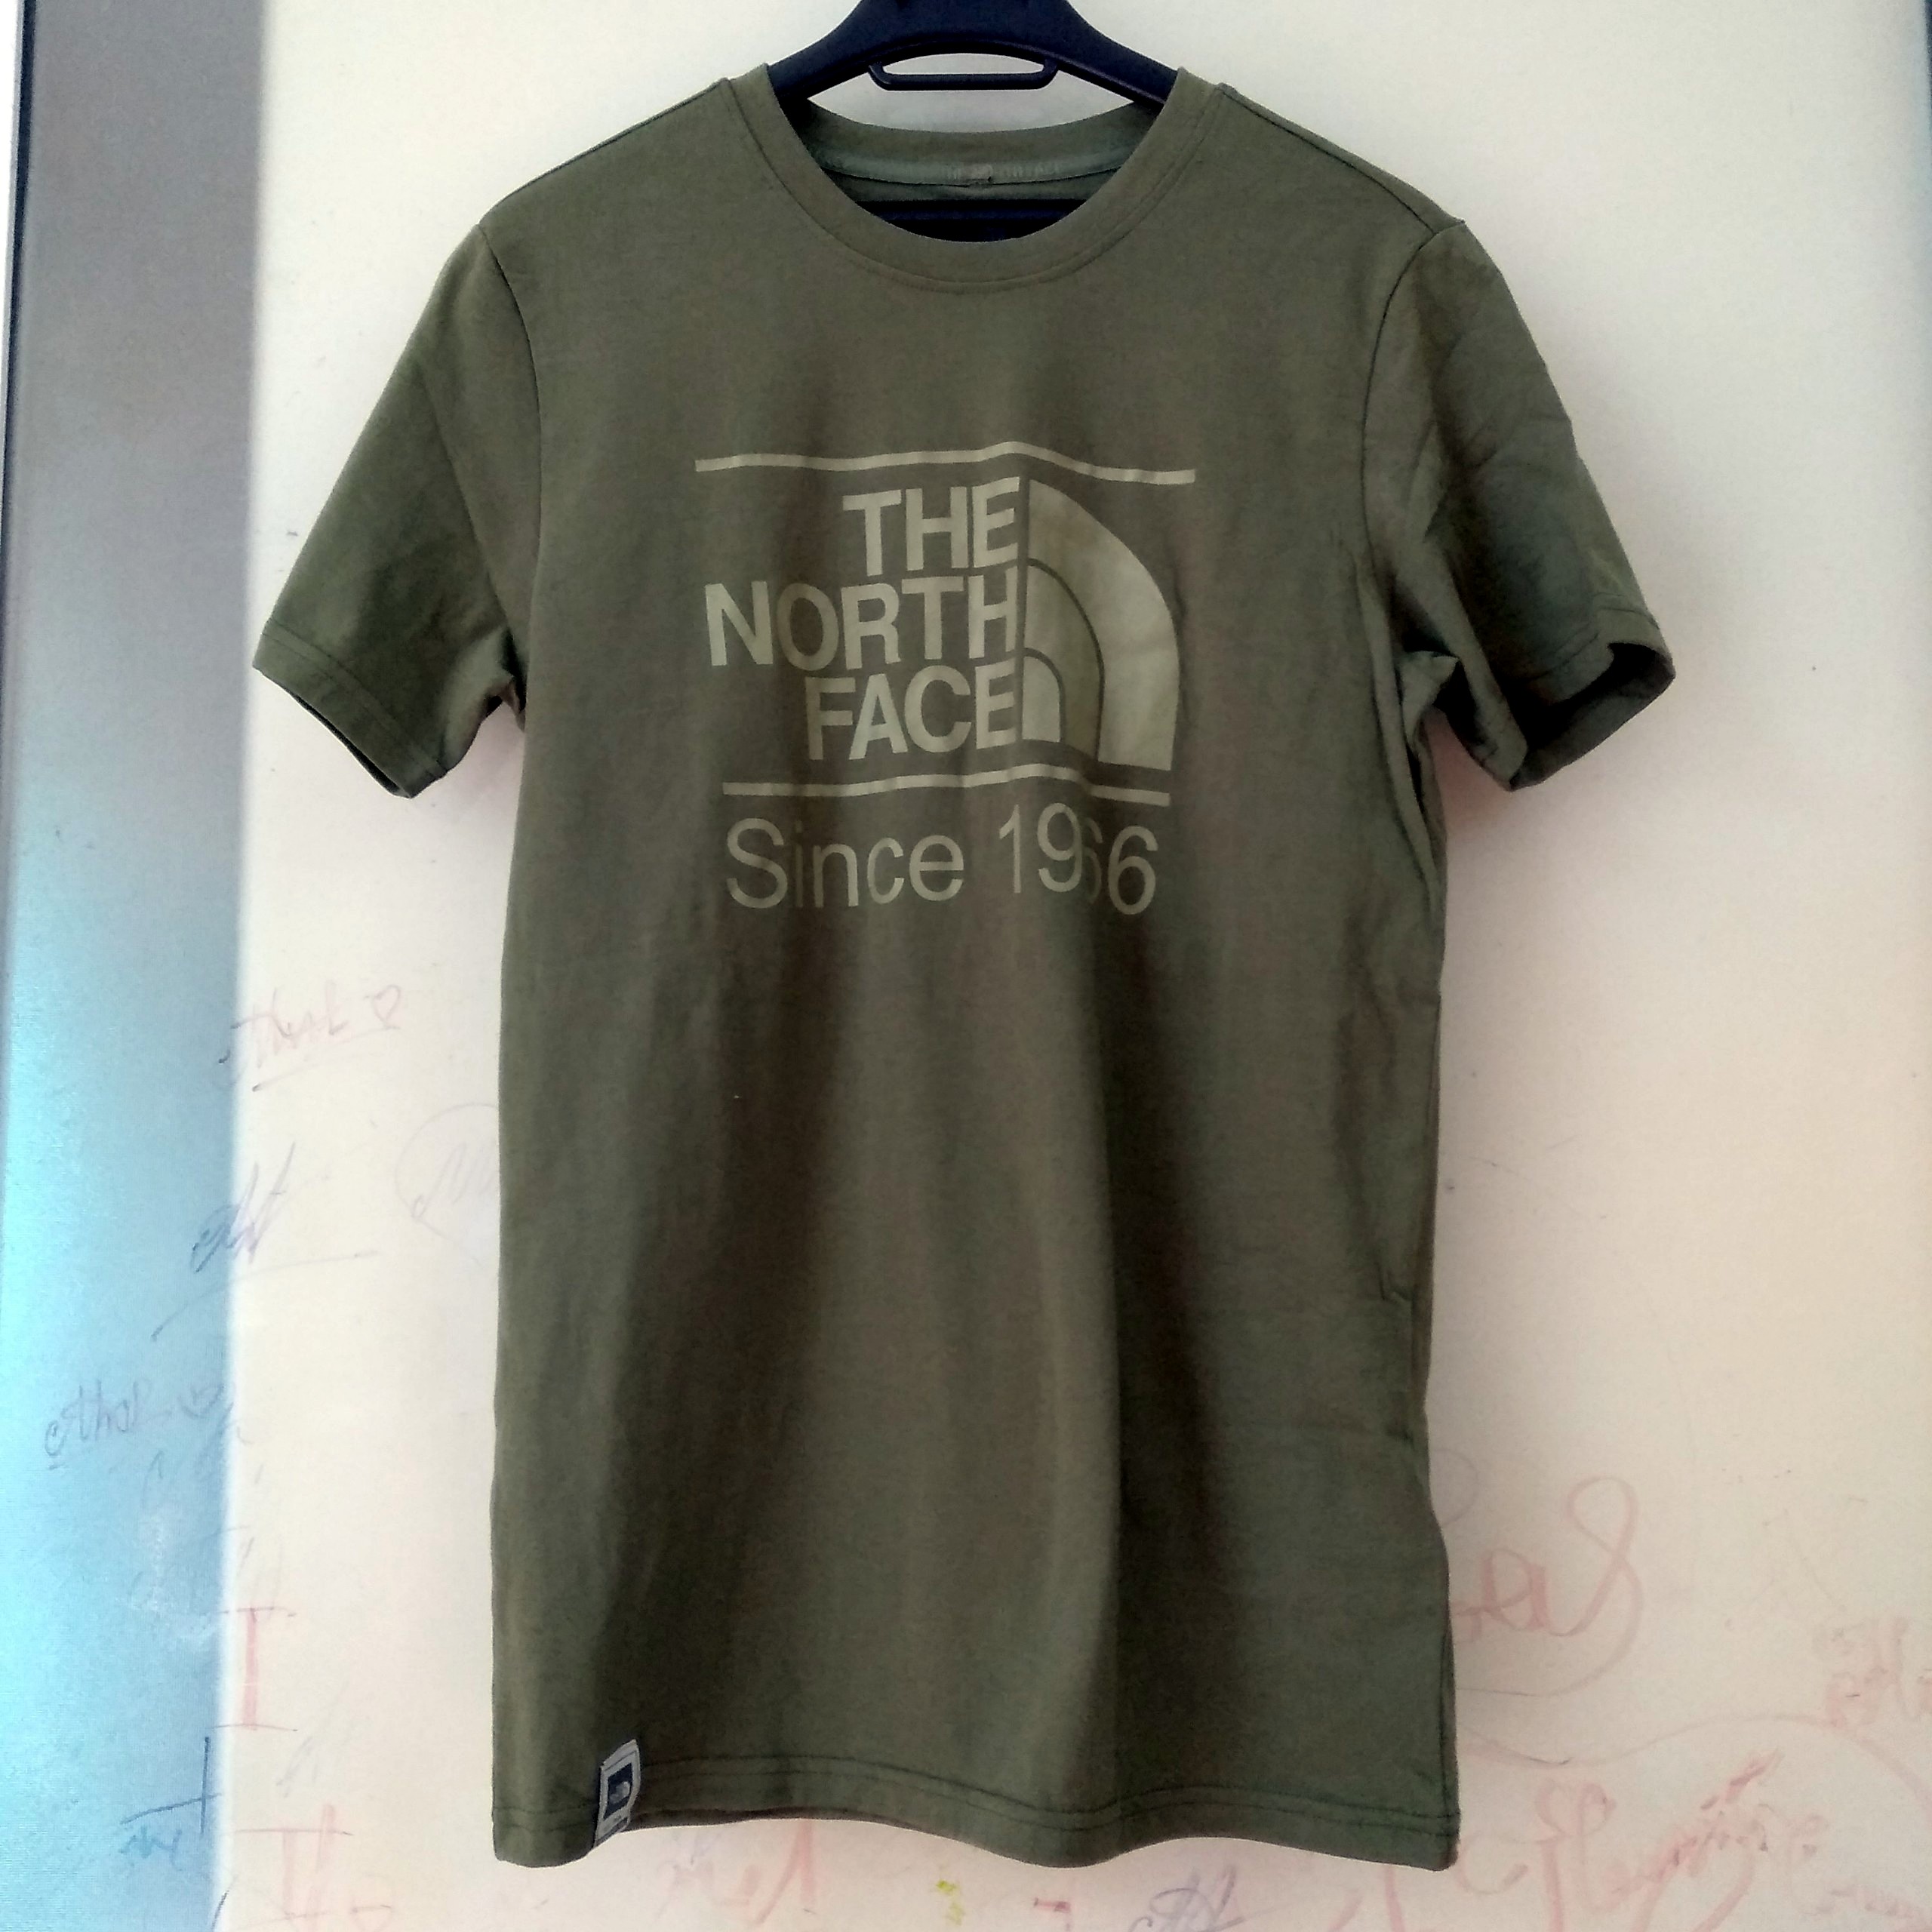 The North Face Vintage Pyrenees Tri Blend Short Sleeve Shirt The North Face ktmart.vn 4